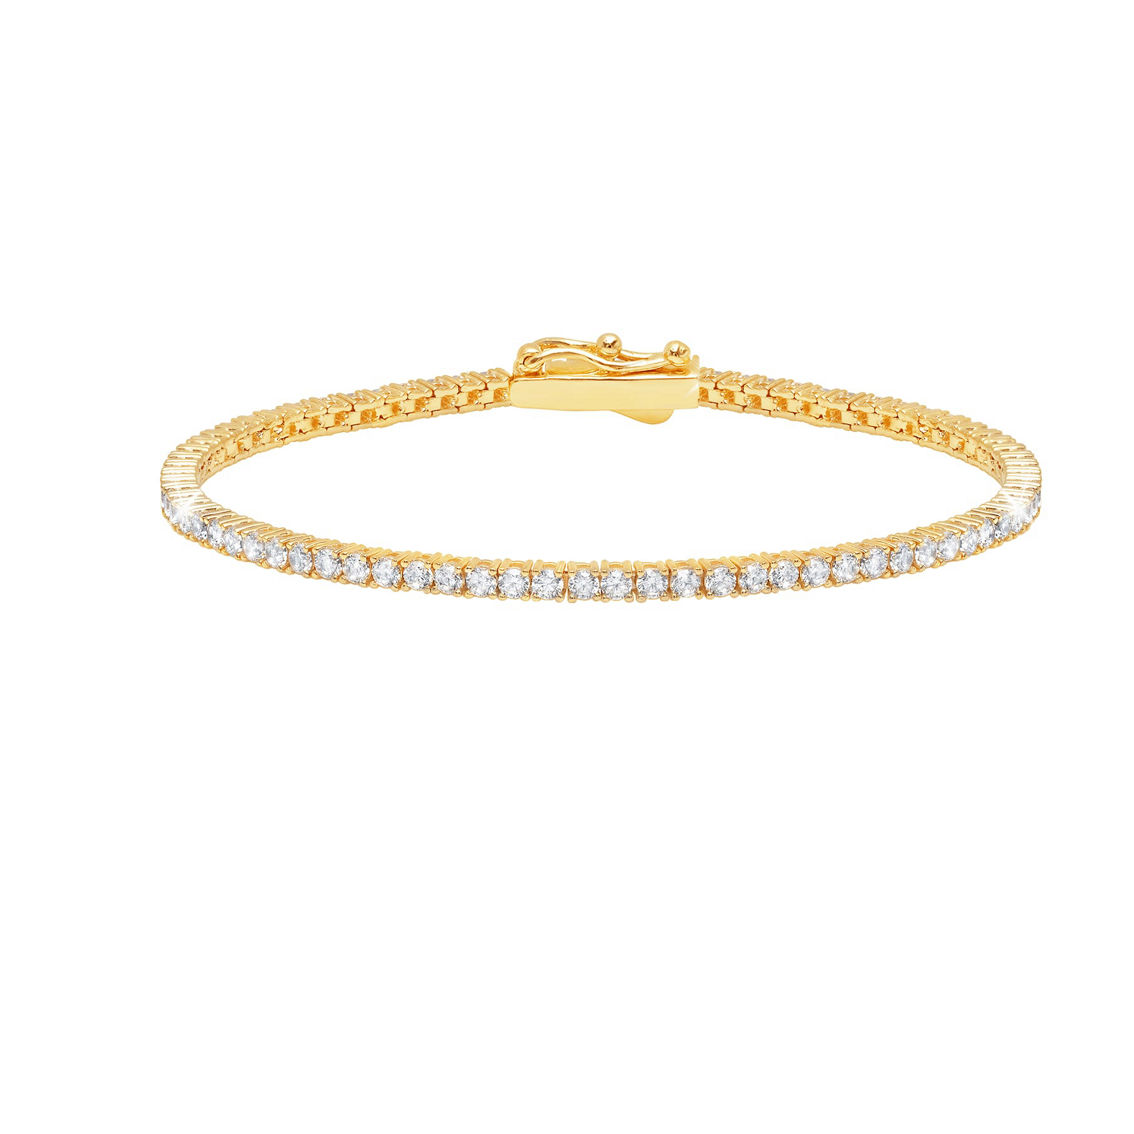 Crislu classic small brilliant tennis bracelet finished in 18kt yellow gold - Image 2 of 2